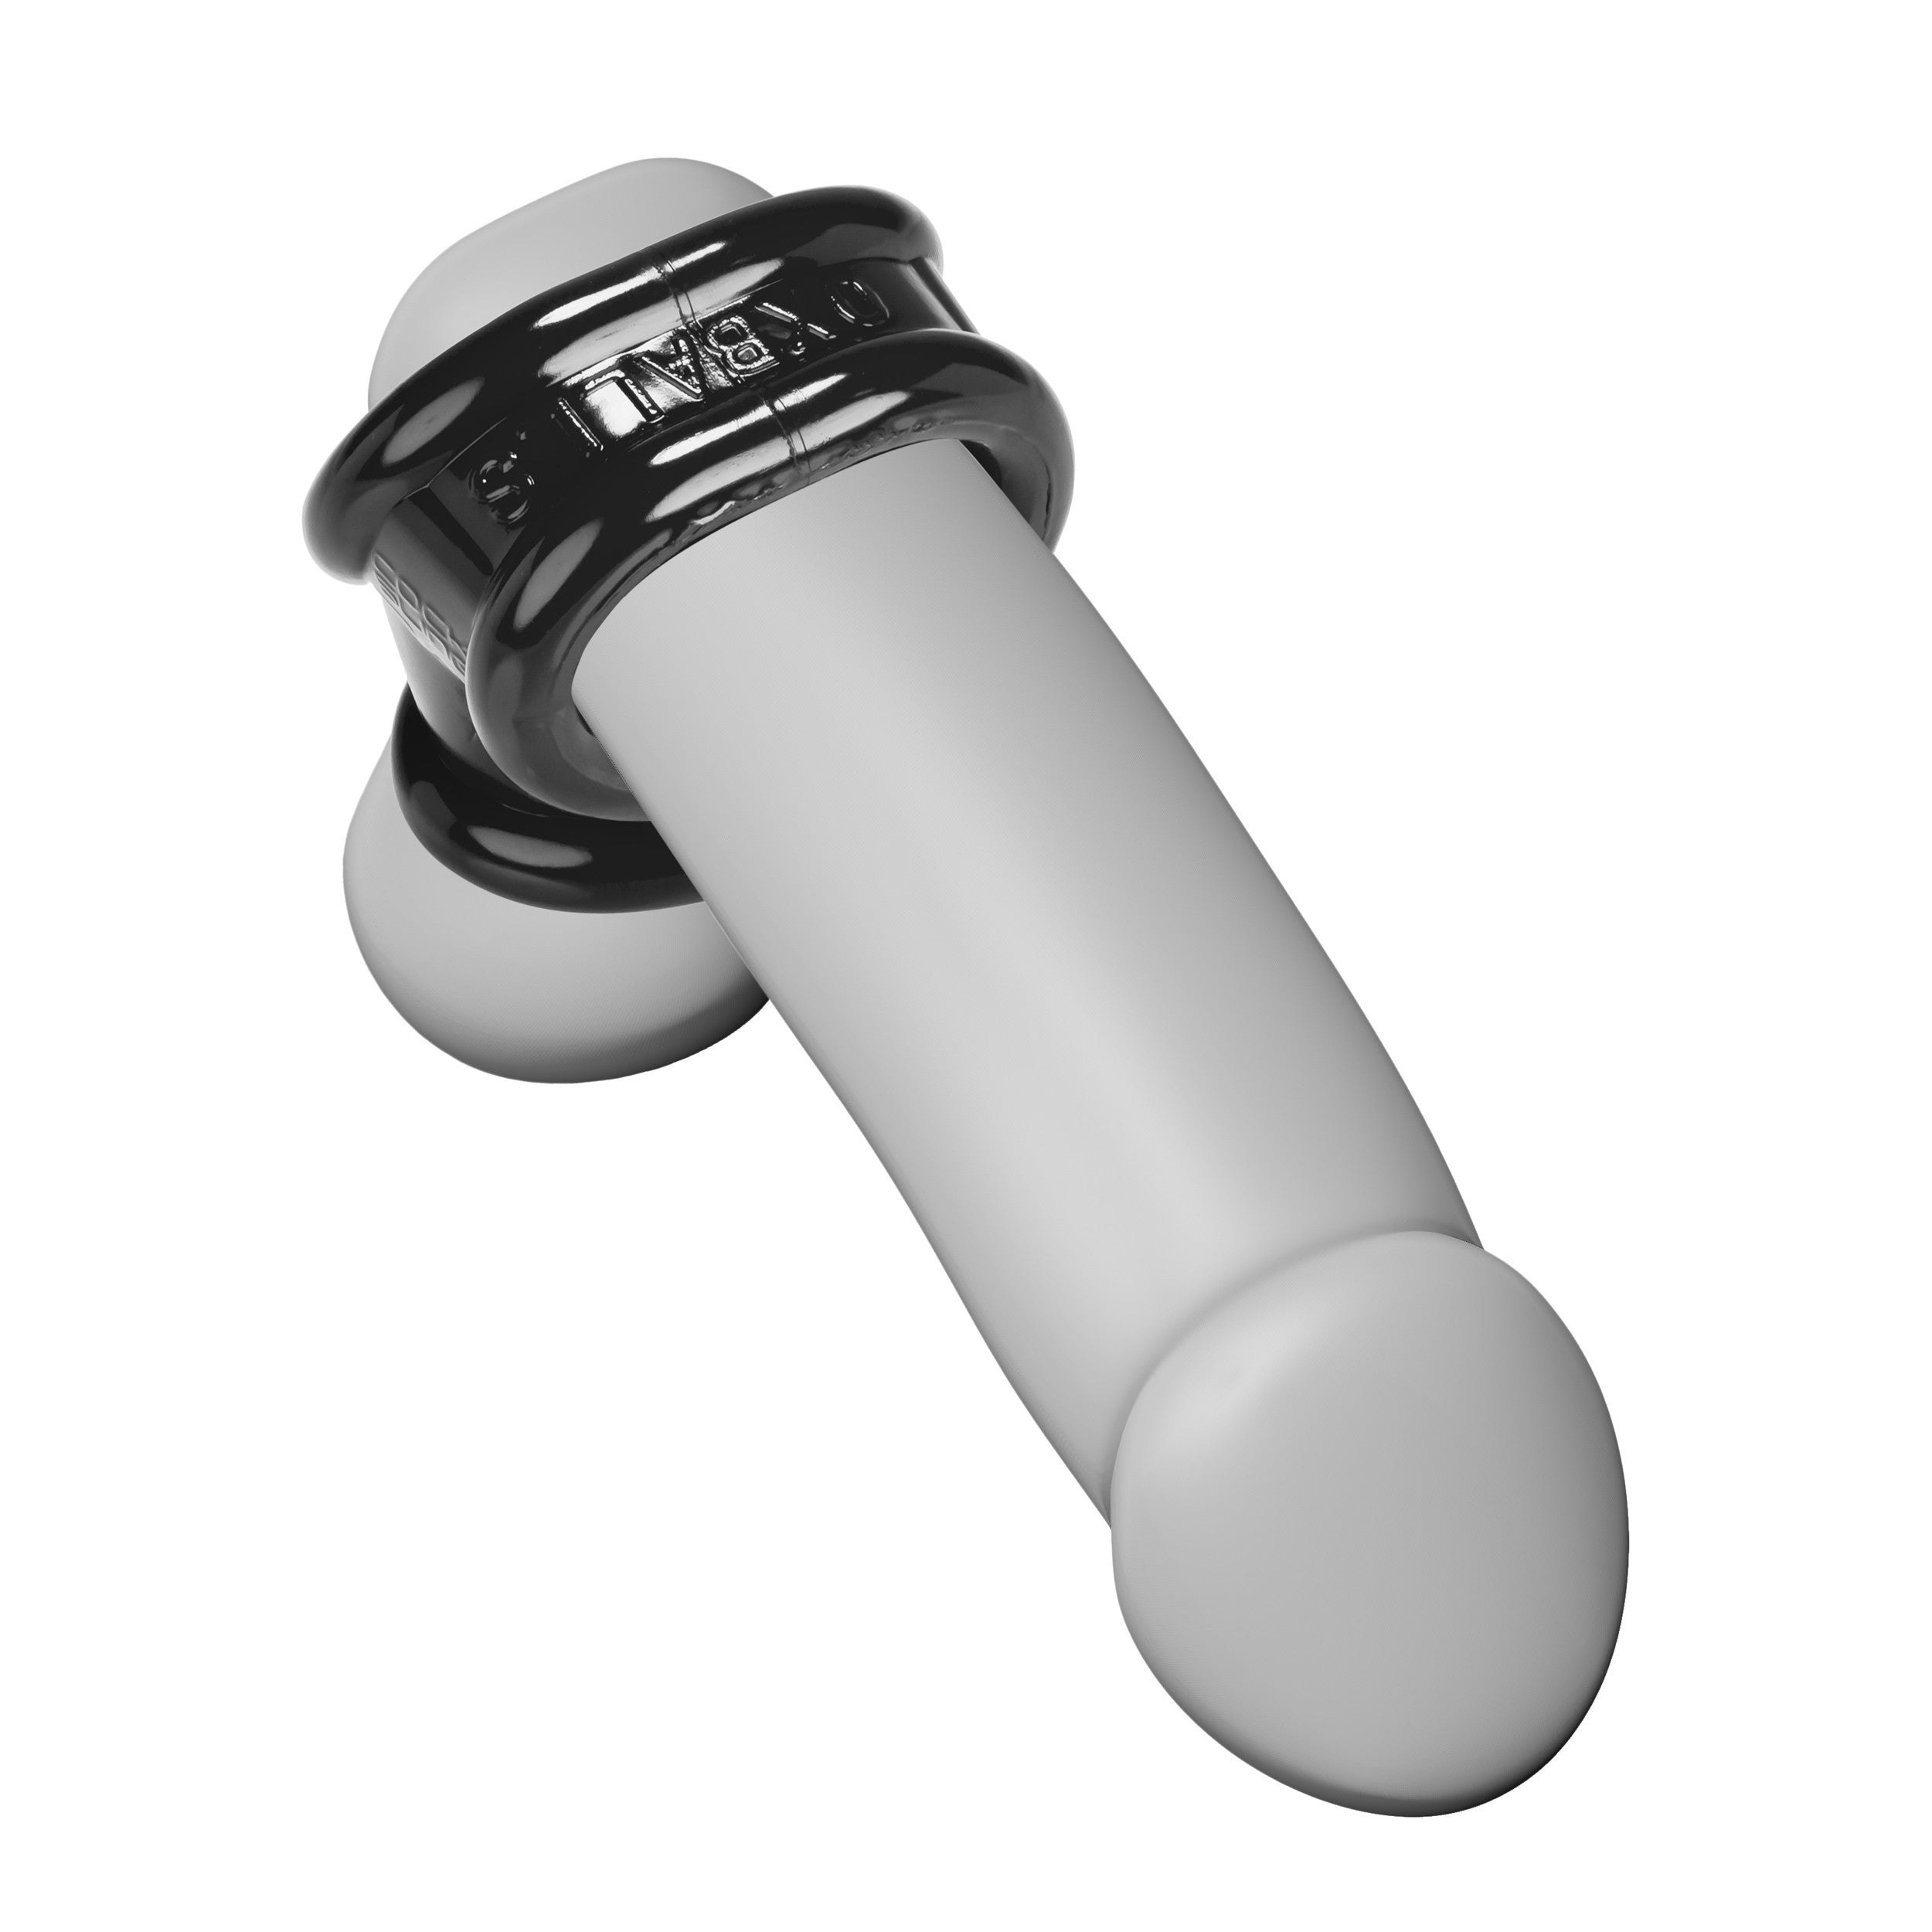 A photo example of the Cocksling on an grey animated penis. The balls and penis both fit through the largest hole, and each come out of the smaller two holes to separate them.